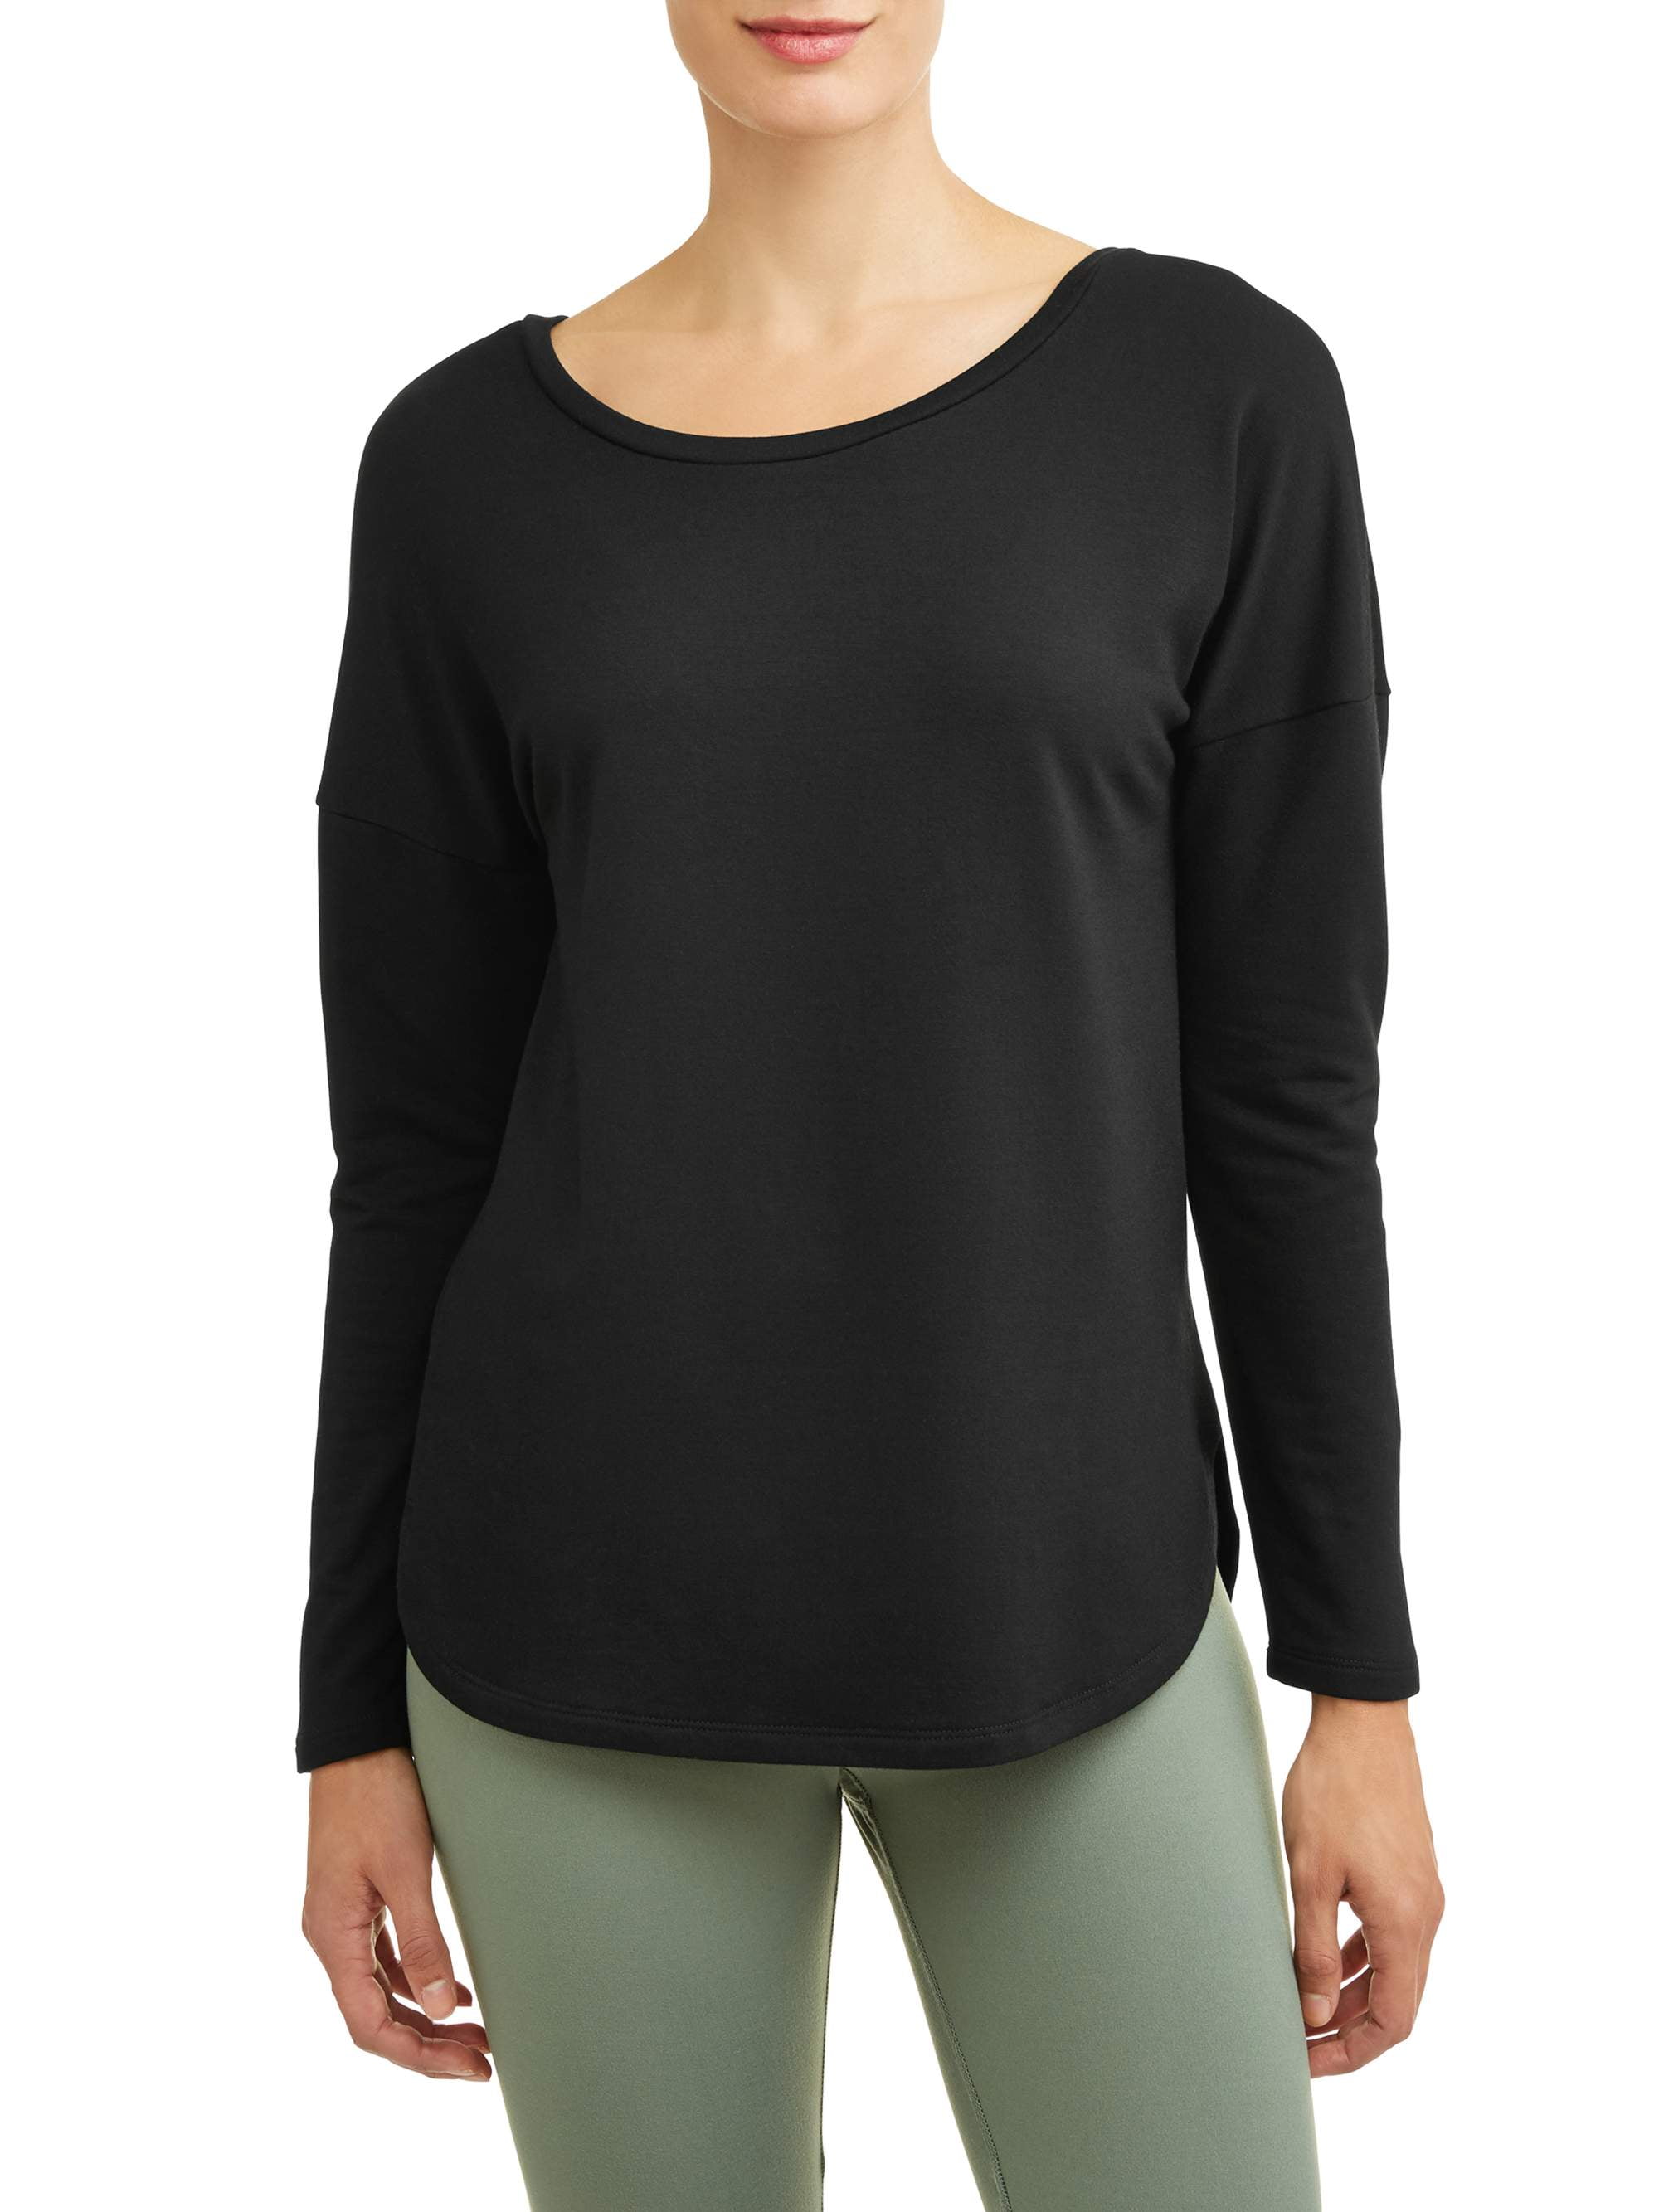 Athletic Works Women's Athleisure French Terry Long Sleeve T-Shirt ...